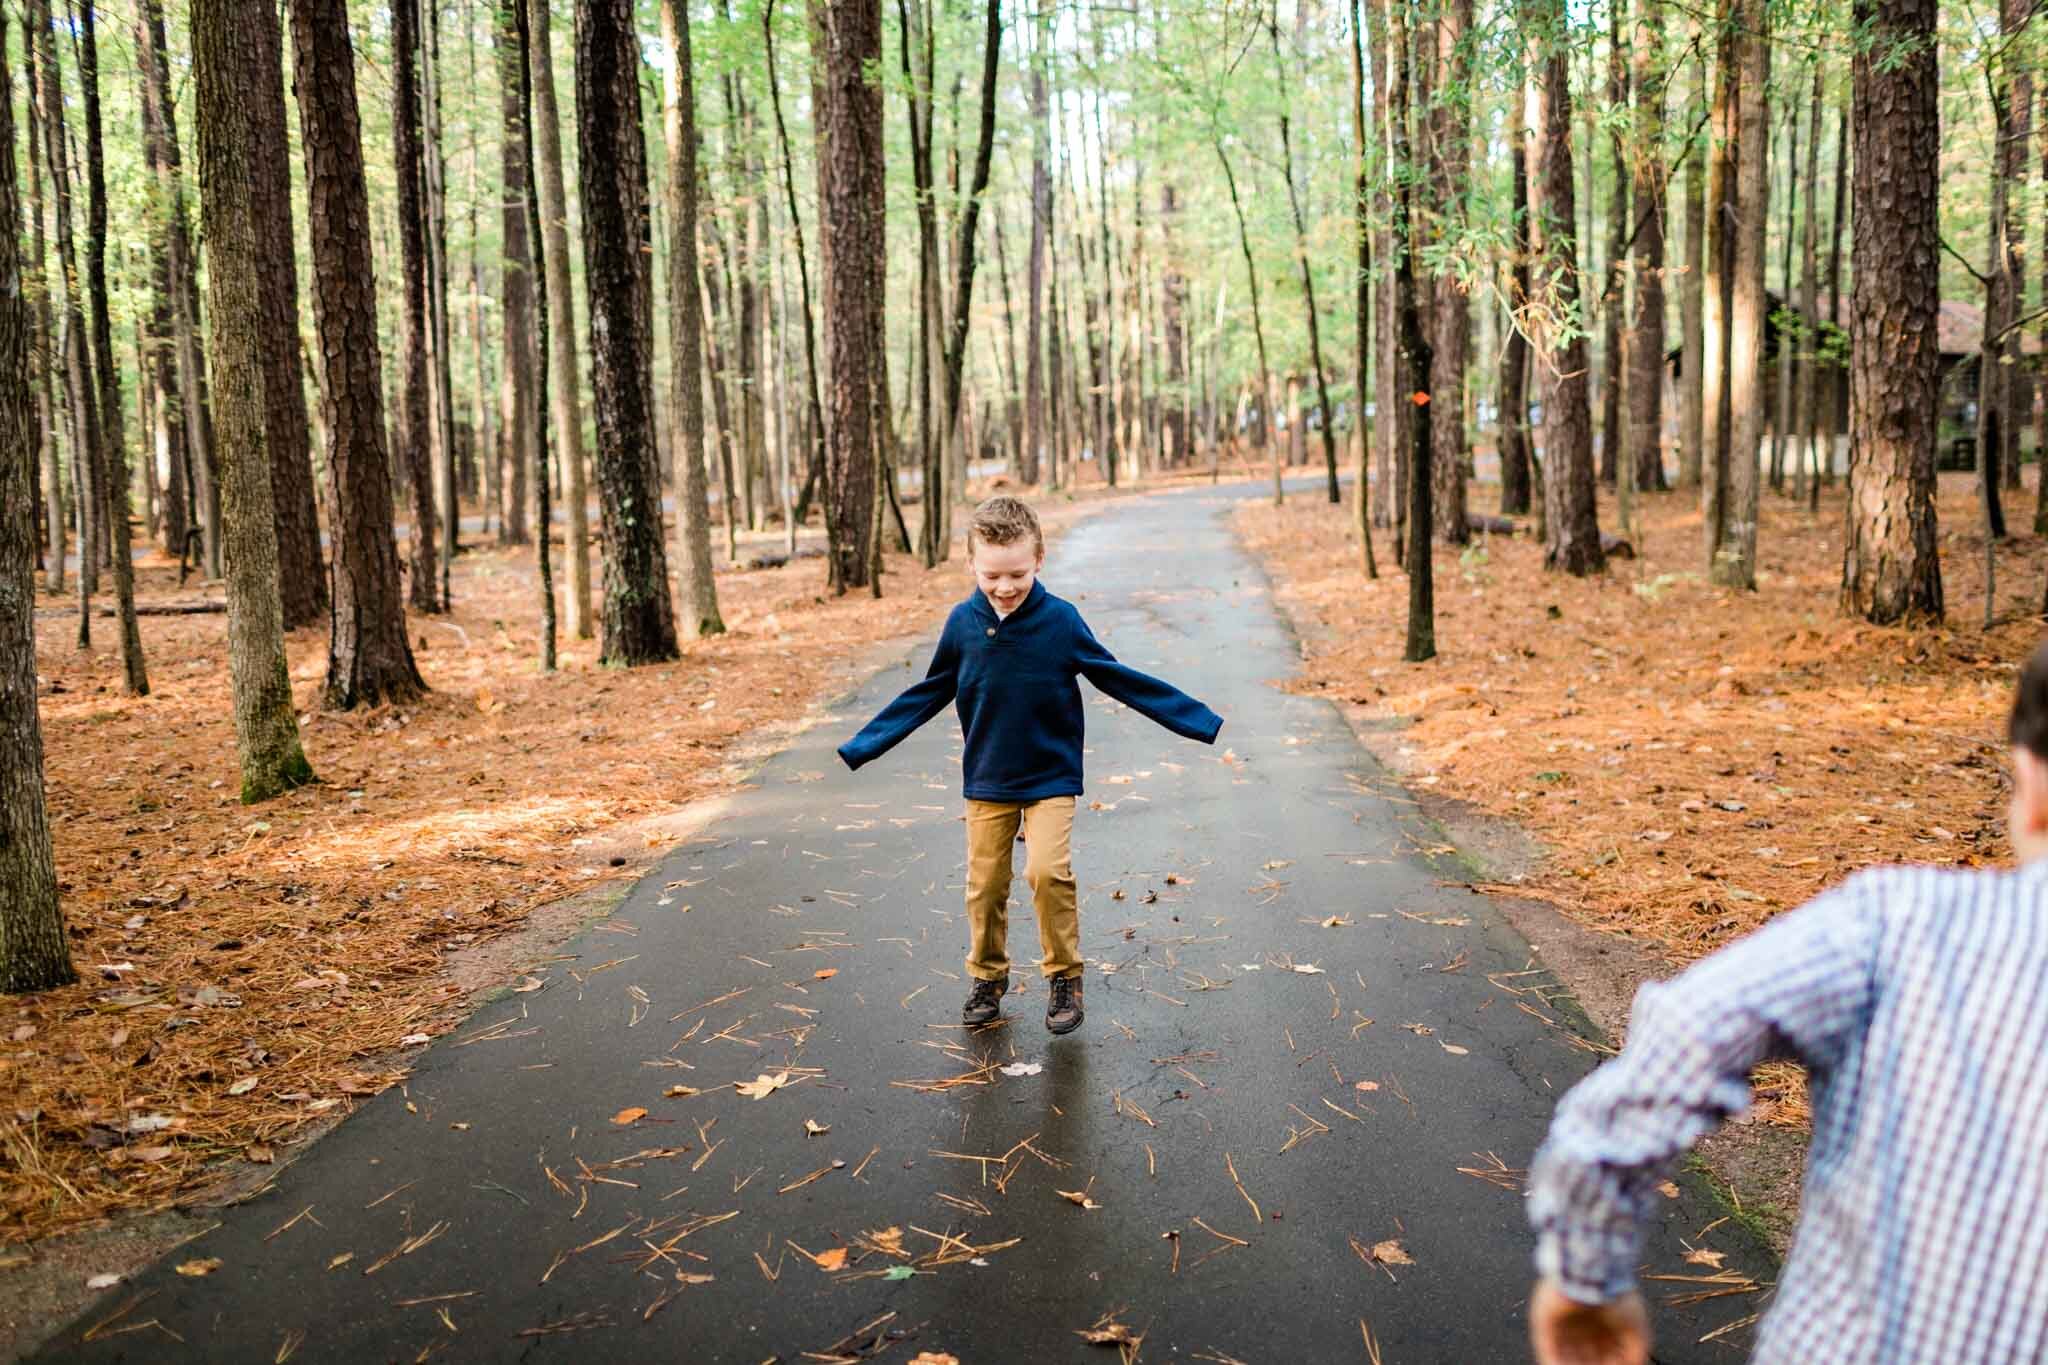 Raleigh Family Photographer | By G. Lin Photography | Umstead Park | Young boy walking backwards on paved path in forest